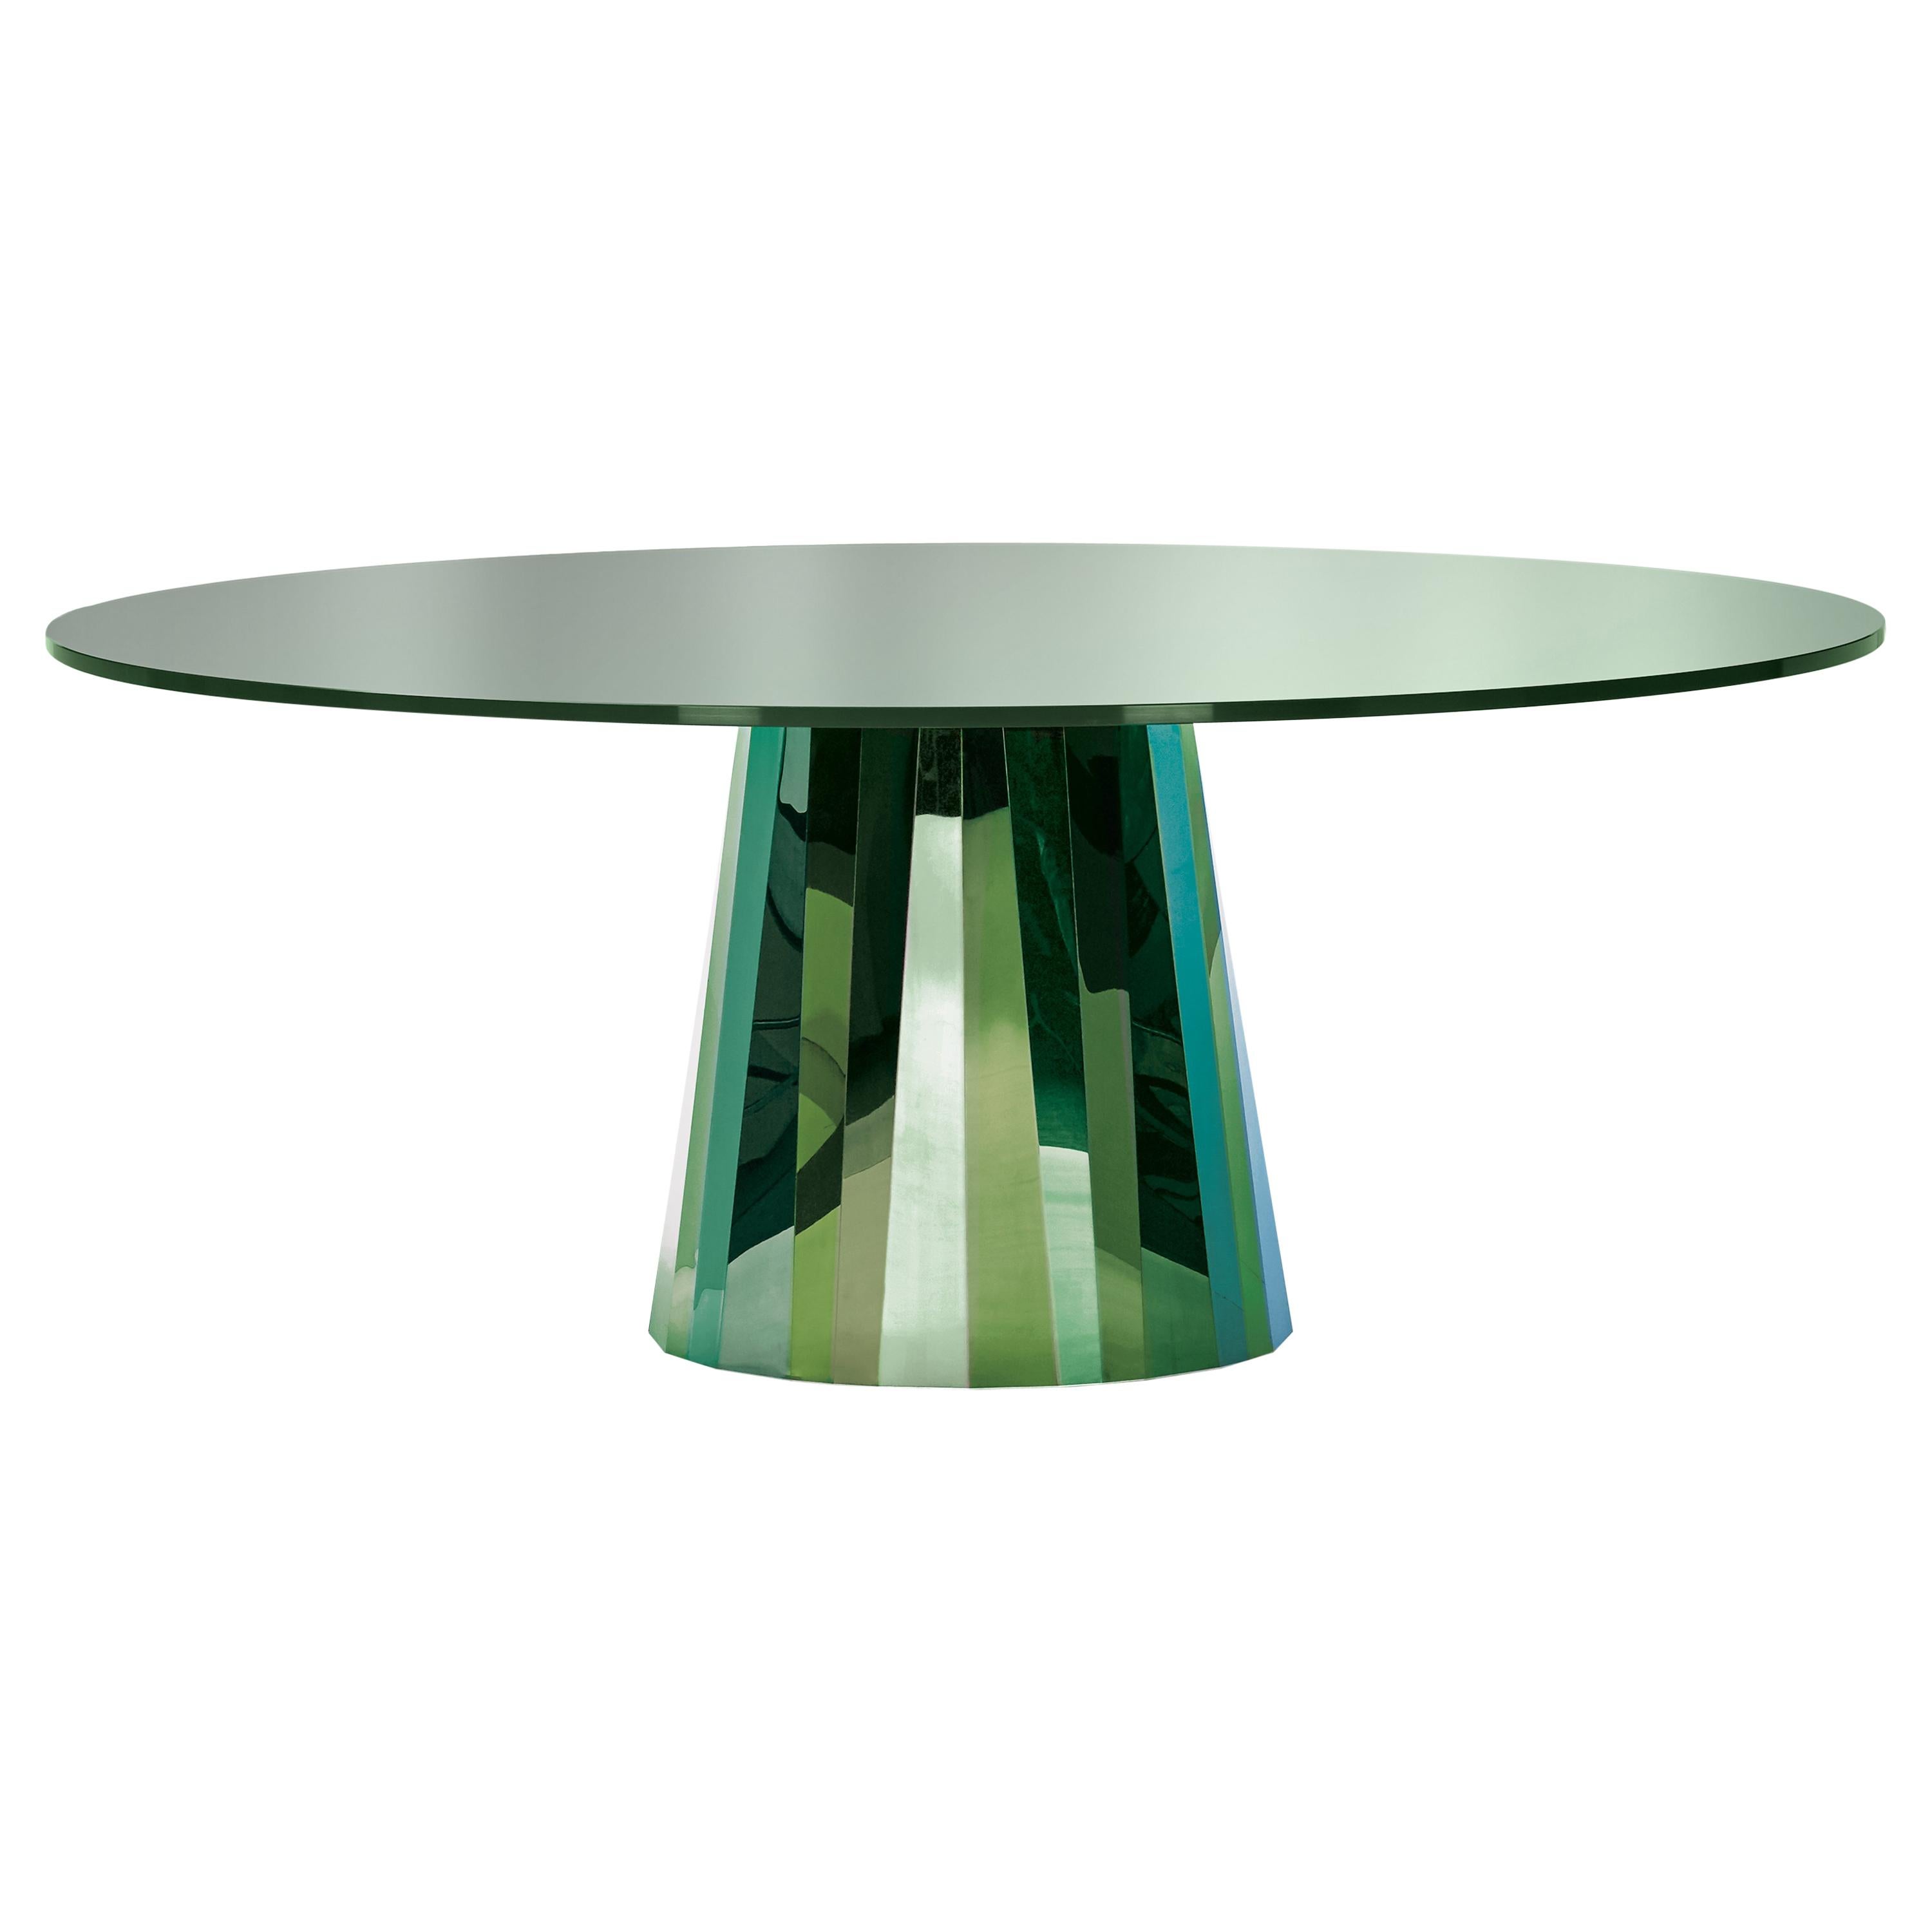 ClassiCon Pli Table in Green with Lacquer Top by Victoria Wilmotte For Sale